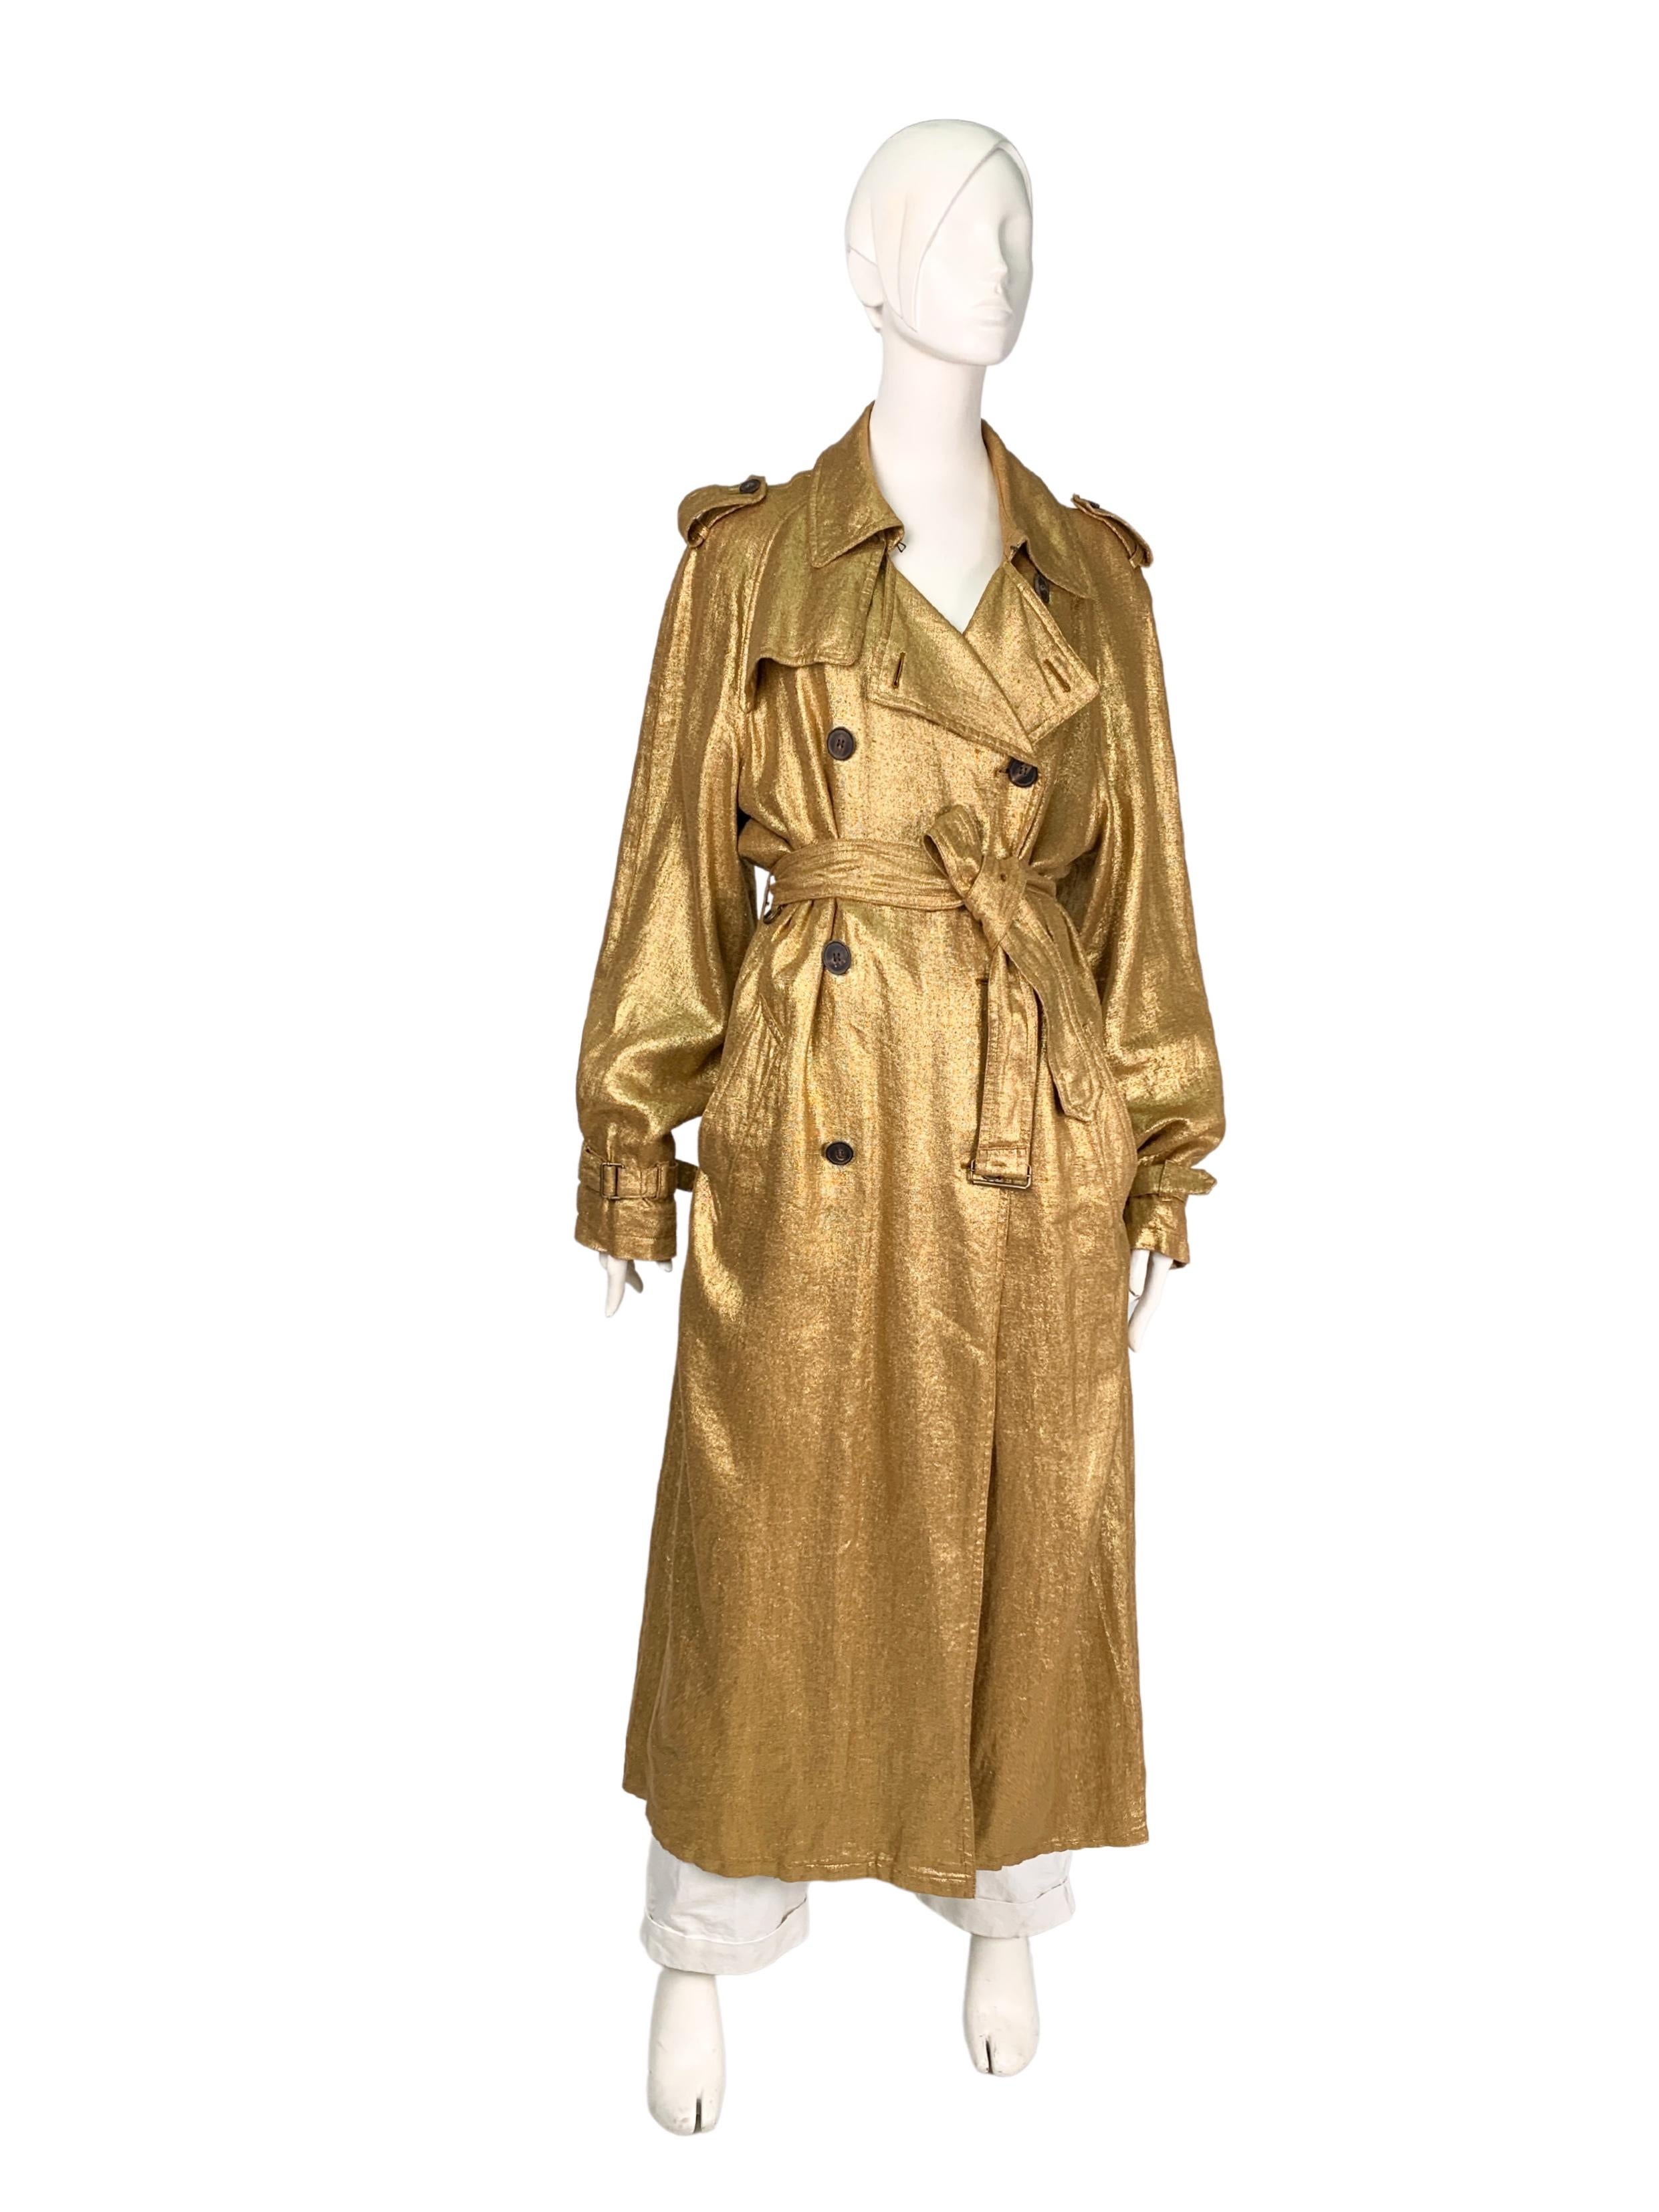 Dries Van Noten metallic gold long double-breasted belted trench coat in 100% linen. The material has a pronounced rough texture, which, combined with metallic gold coating,  creates an interesting effect and adds a casual touch to the garment. Both